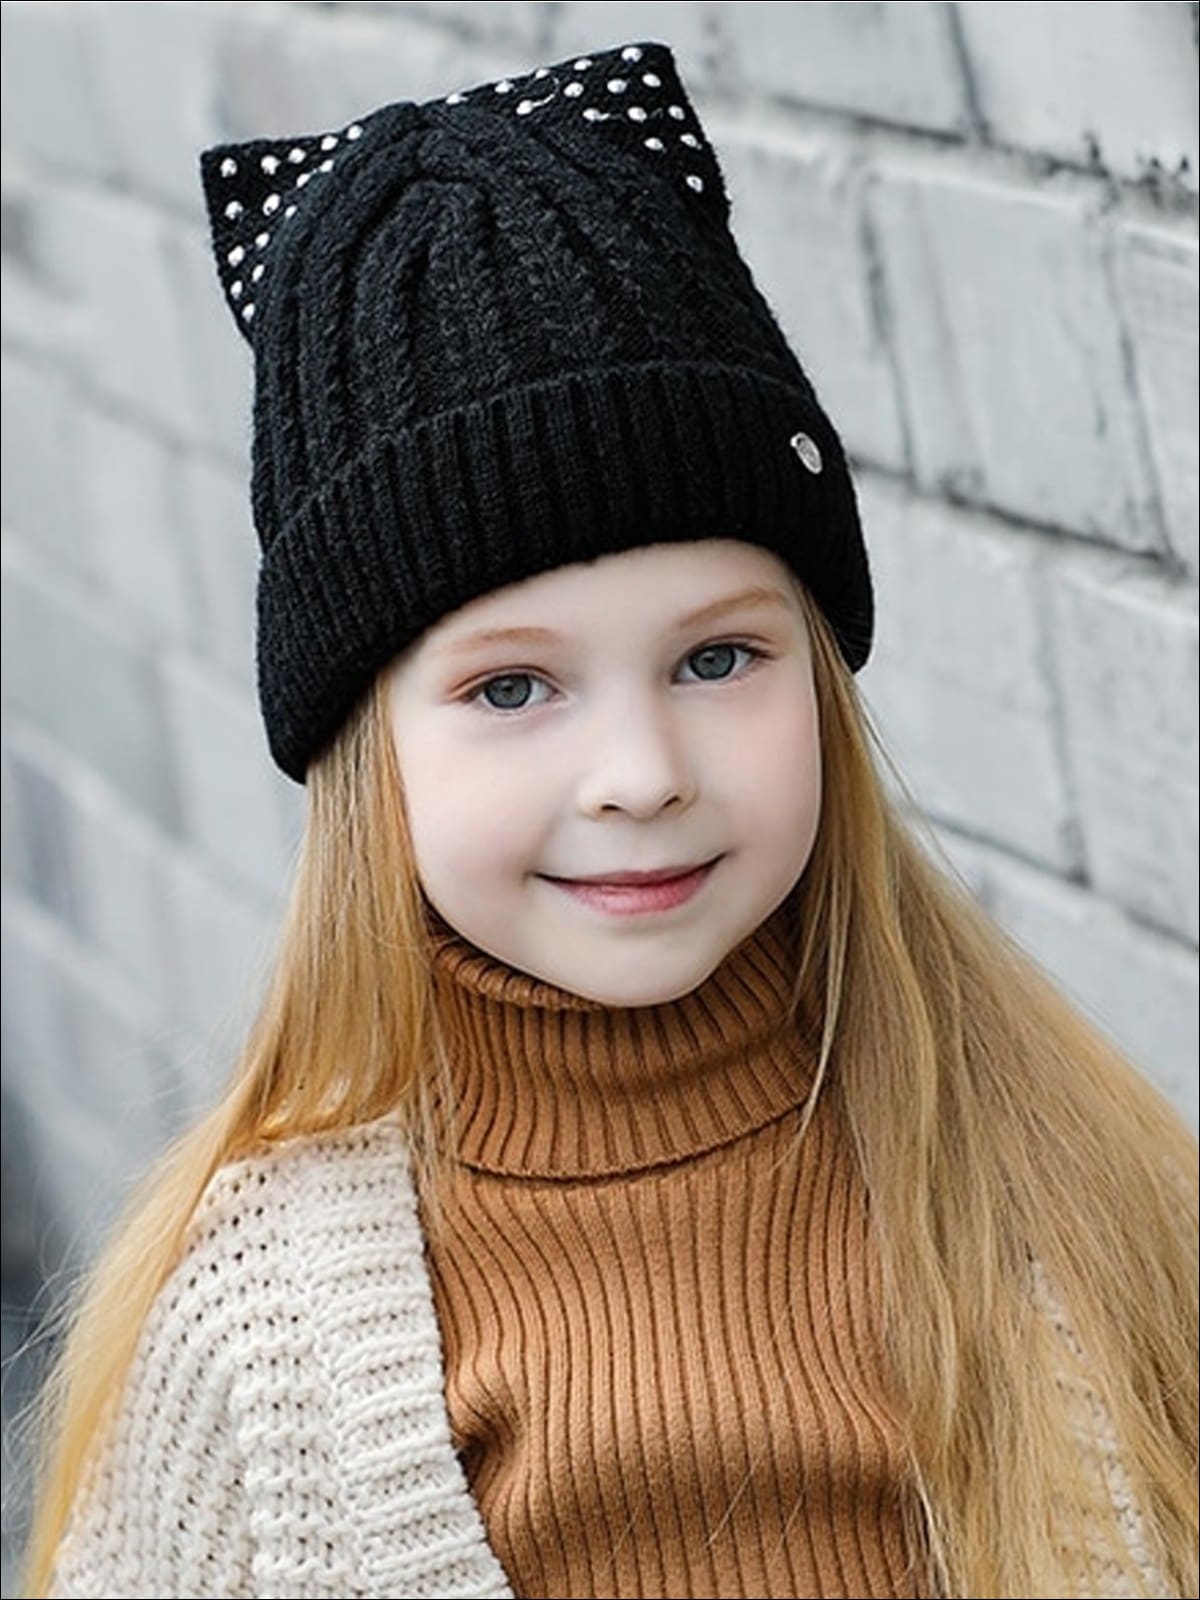 Girls Fall Cable Knit Animal Ear Embellished Beanie - Black / One - Girls Hats